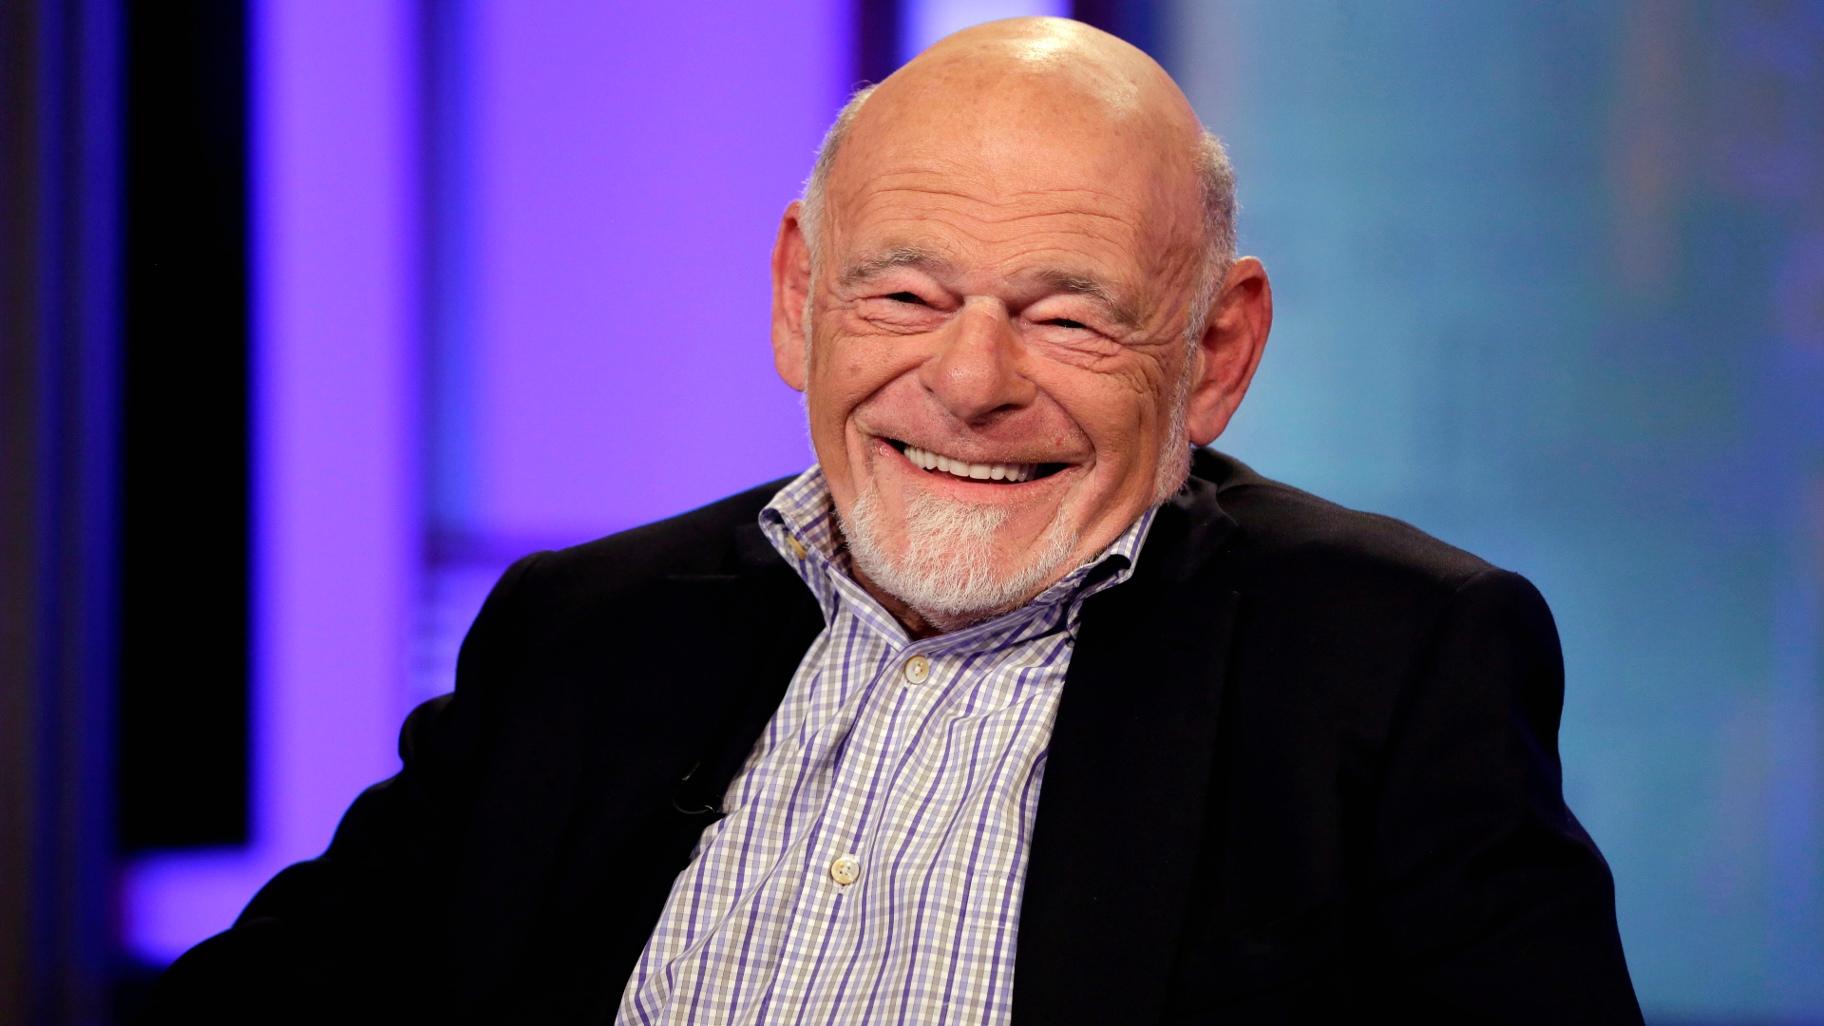 Sam Zell, chairman of Equity Group Investments, and chairman of Equity International, smiles during an interview by Neil Cavuto, on the Fox Business Network, in New York, on Aug. 6, 2013. (AP Photo / Richard Drew, File)